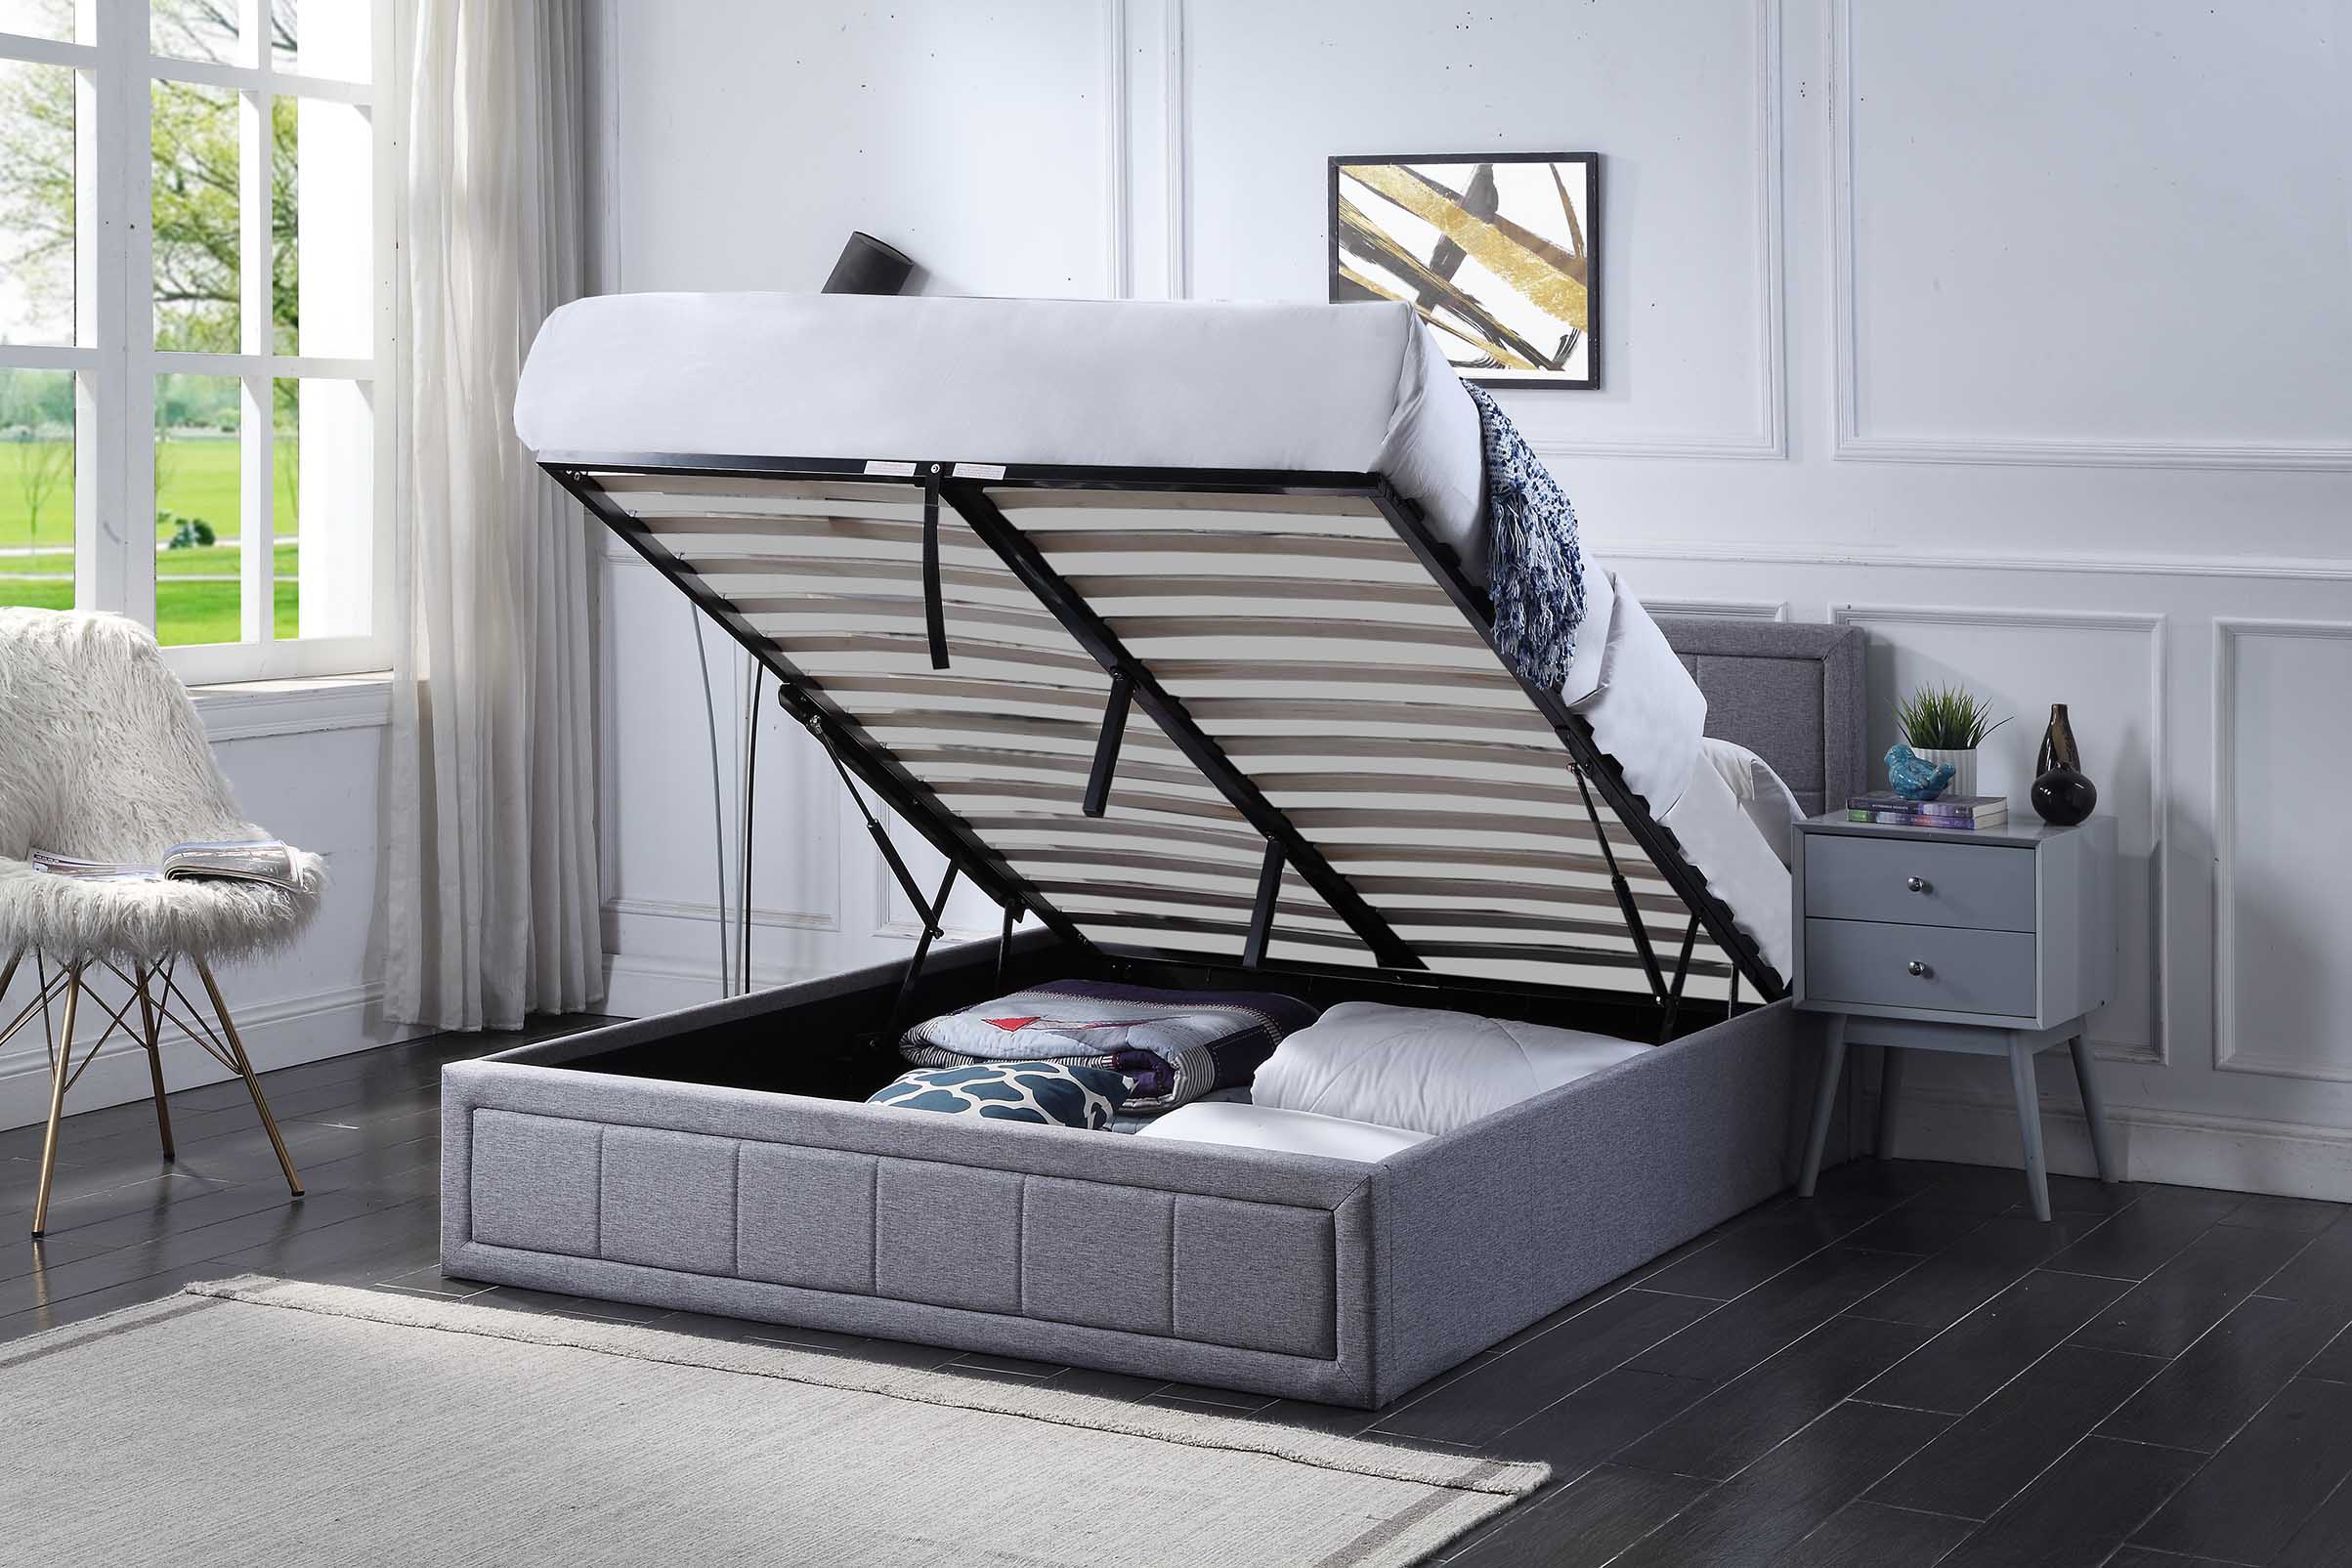 Lift Up Storage Ottoman Bed Frame, King Size Bed Frame Lift Up Storage